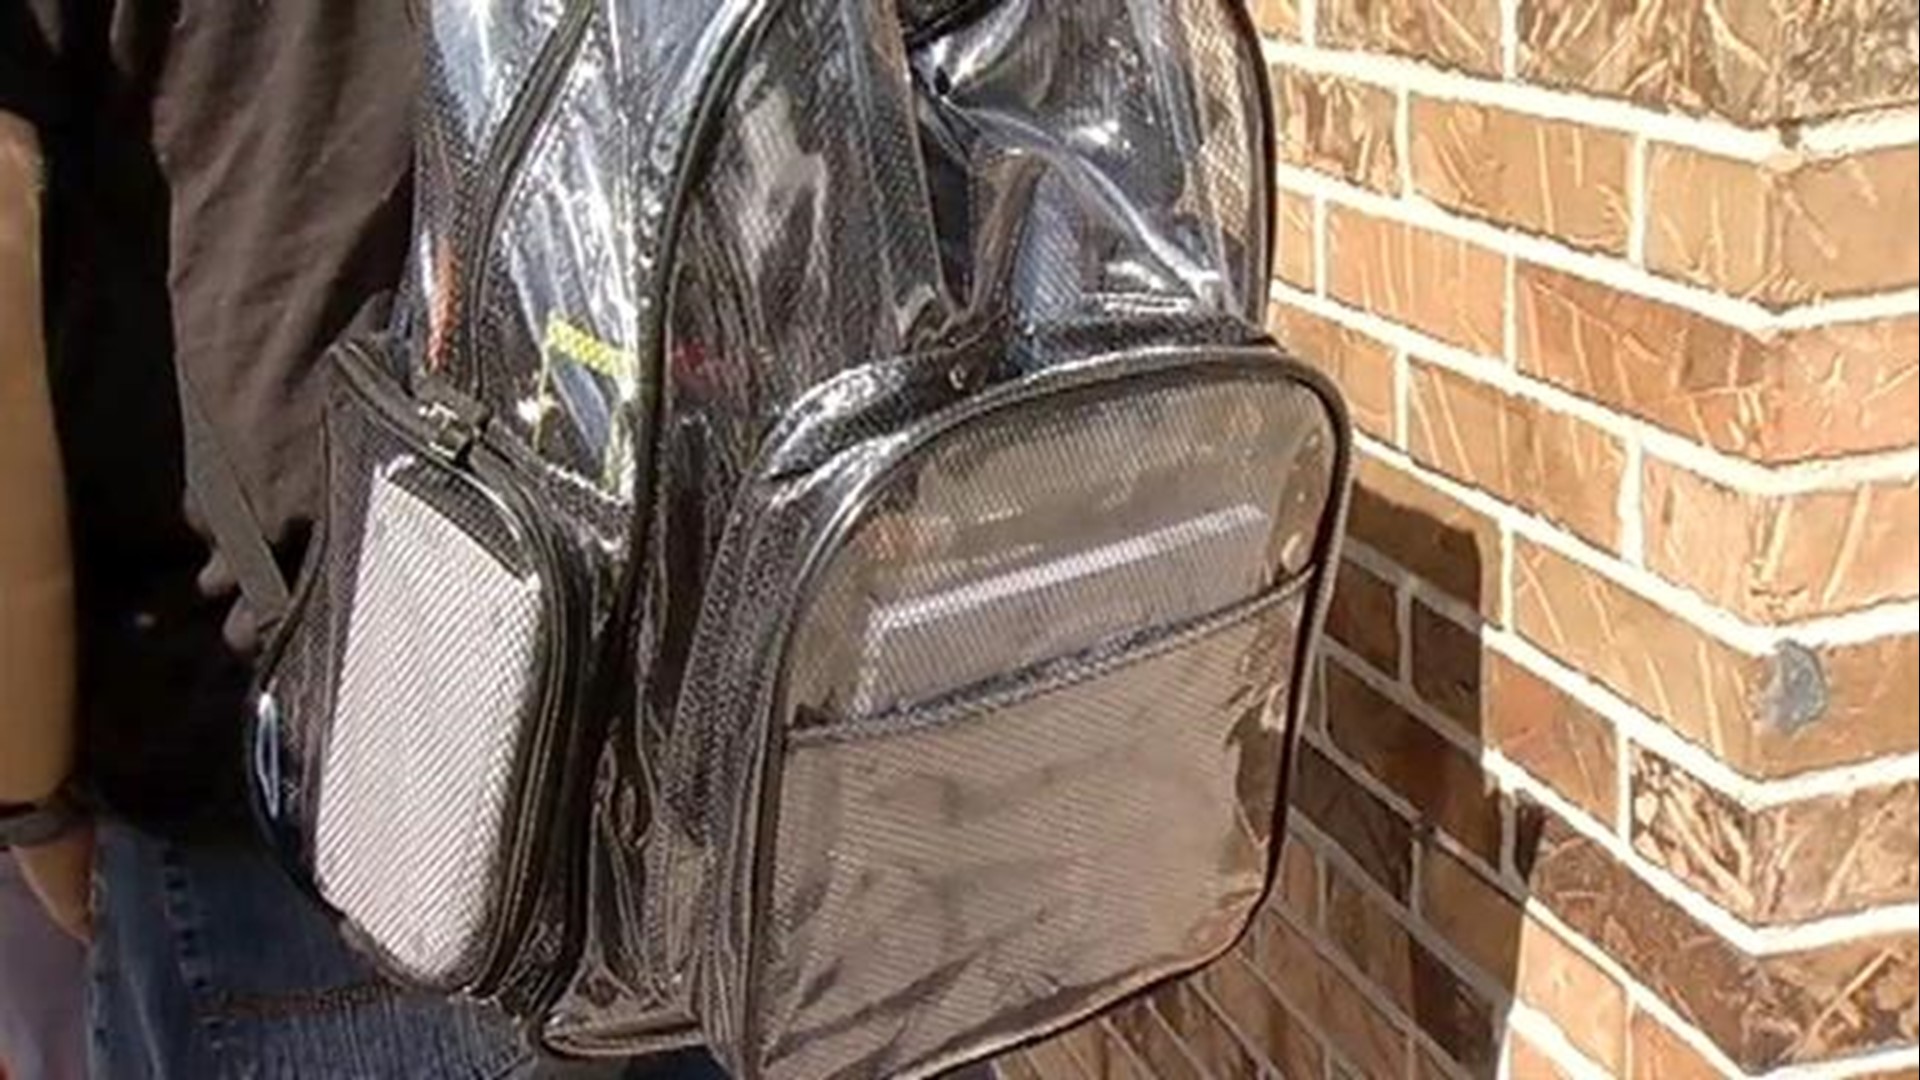 Students at Cochrane Collegiate Academy and Hopewell High School will pilot the clear backpack program first before it rolls out to other schools.